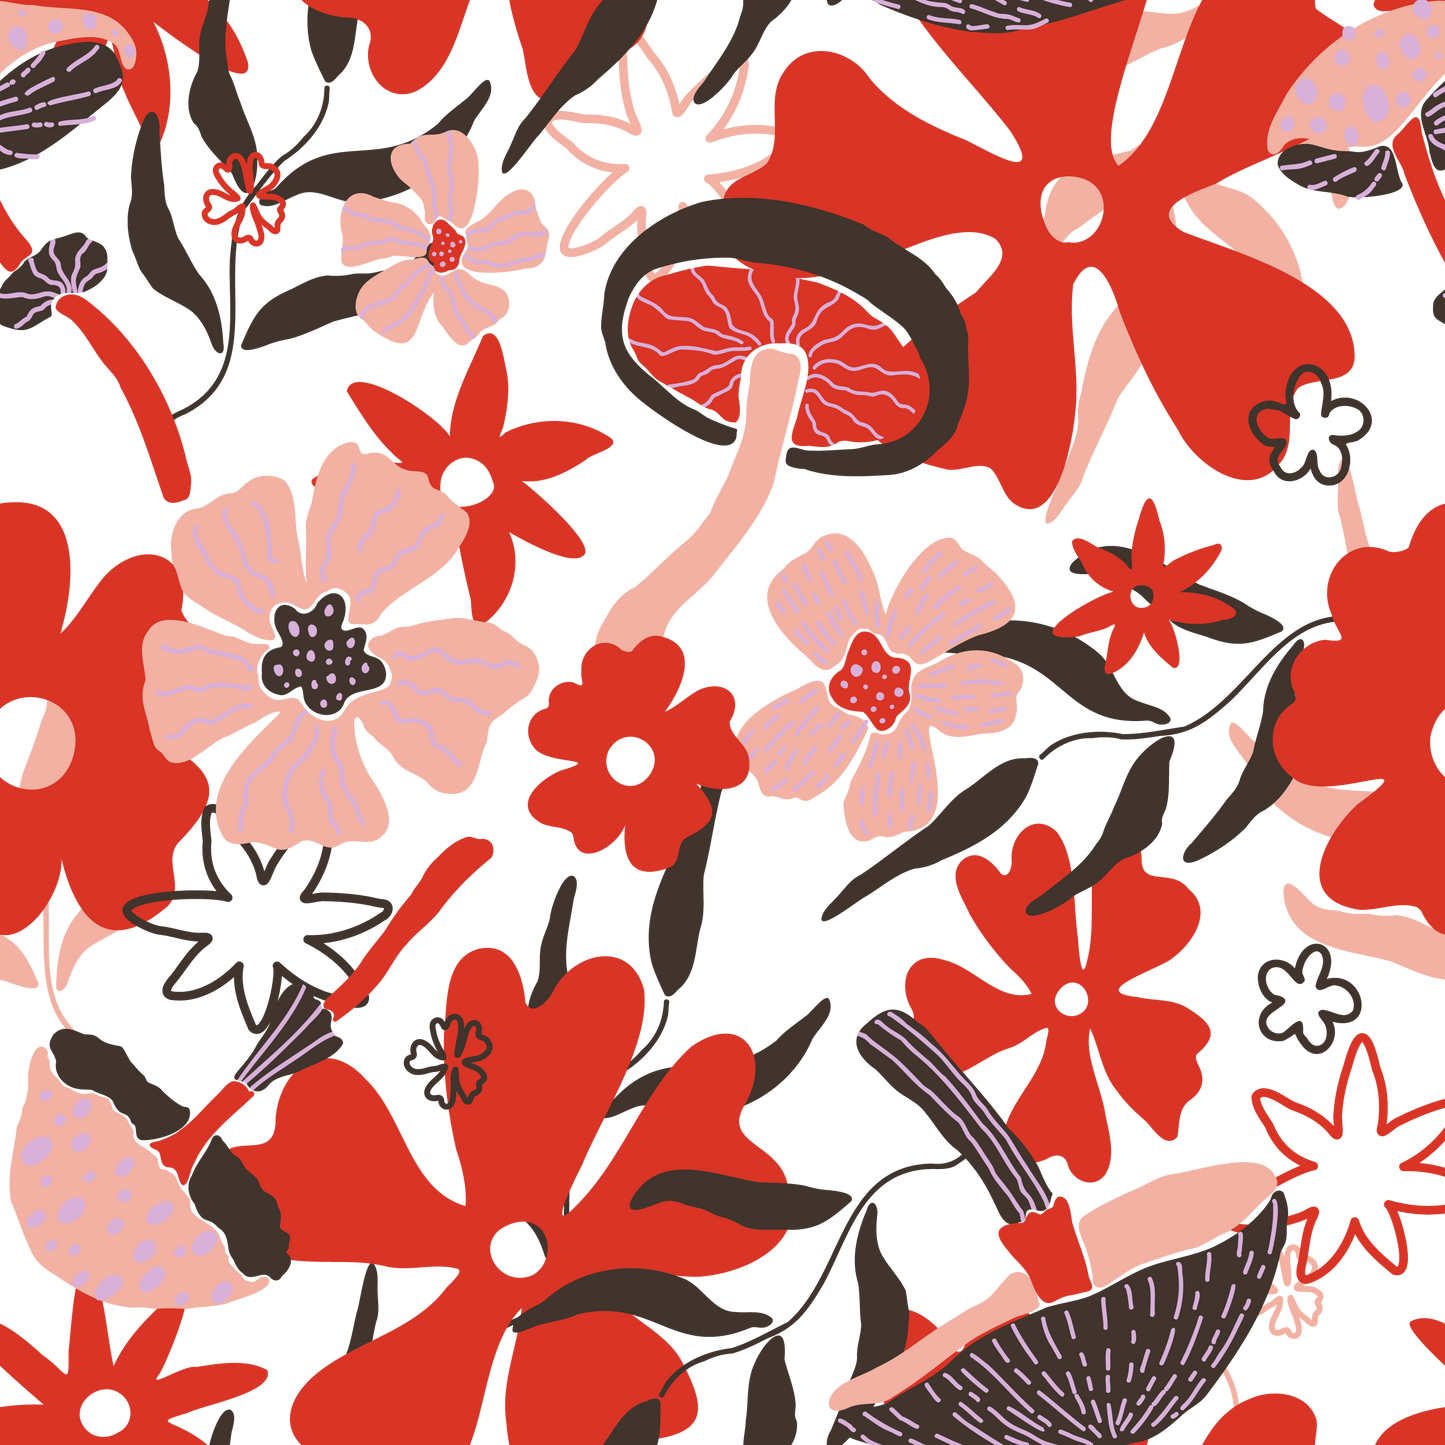 Mushrooms & Flowers (Faux Leather - 8" x 13" Printed Sheet)